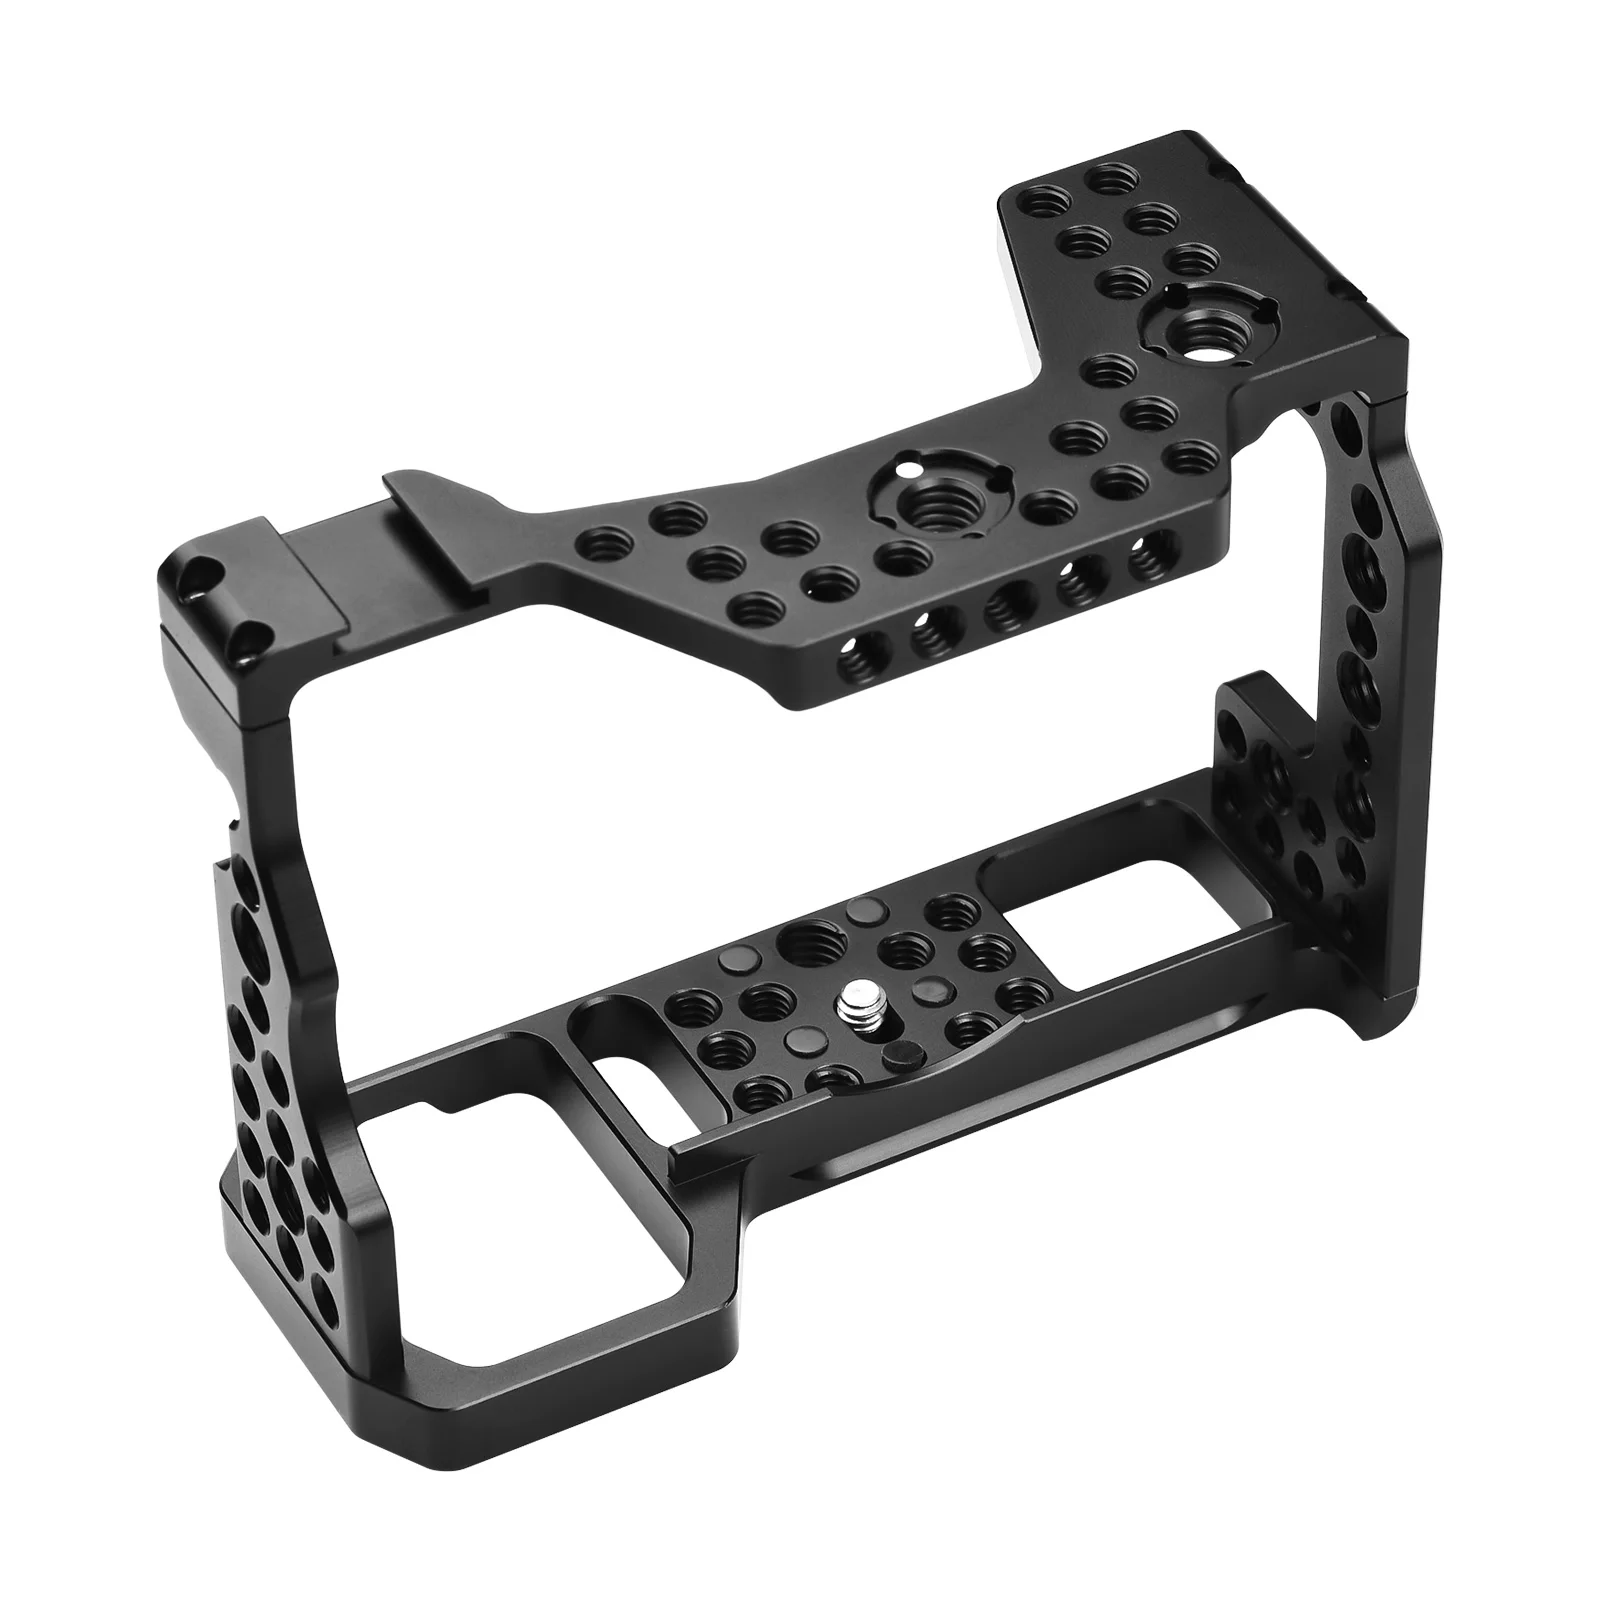 

Camera Cage Aluminum Alloy Video Cage for Sony A7M3 A7R3 A9 Mirrorless Camera with Cold Shoe Mount 1/4 & 3/8 Inch Screw Holes